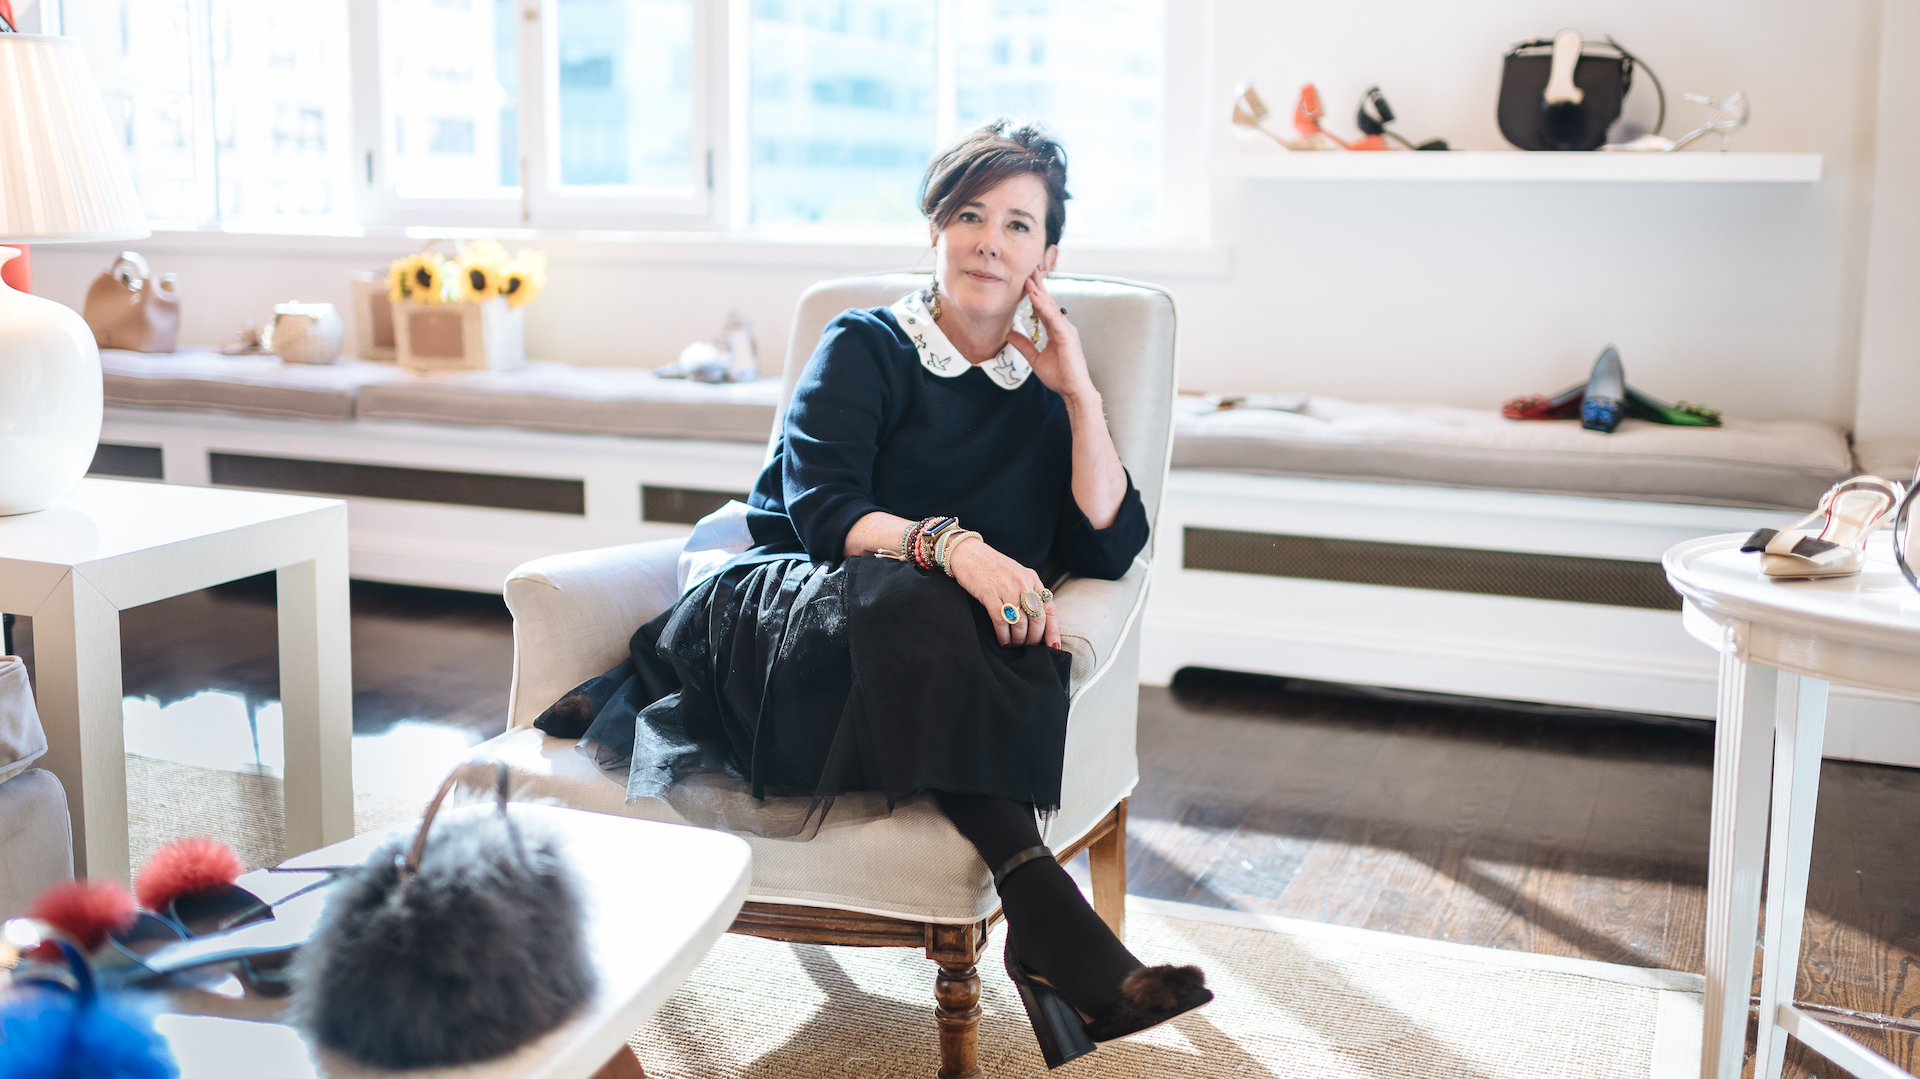 How Kate Spade brought joy to both fashion and women's lives - The  Washington Post